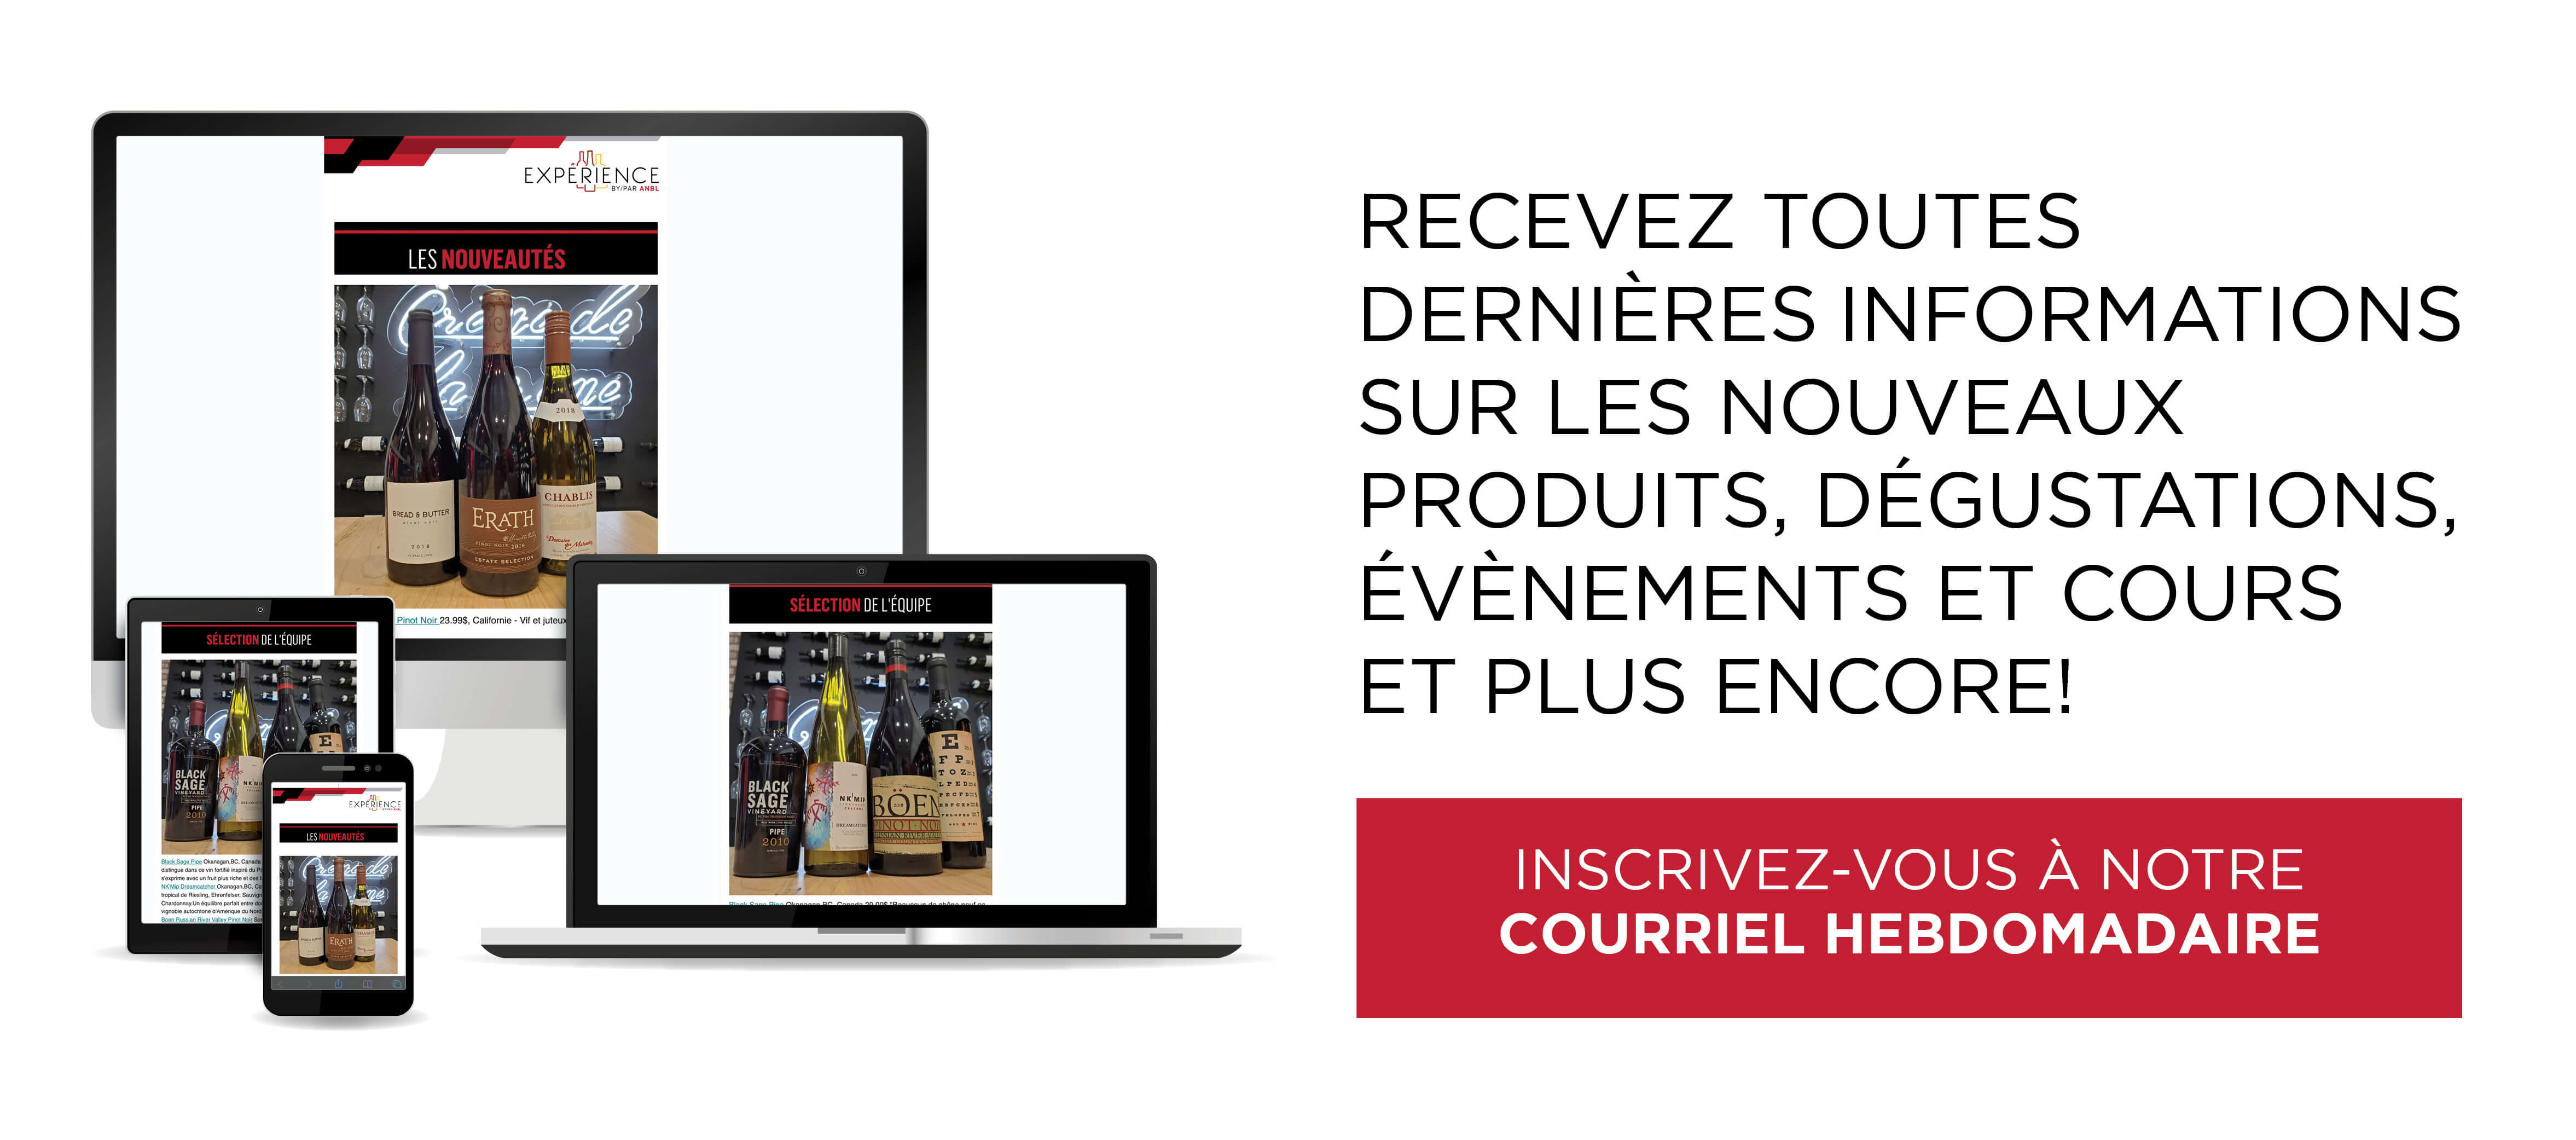 experience-boutique-newsletter-footer-fr